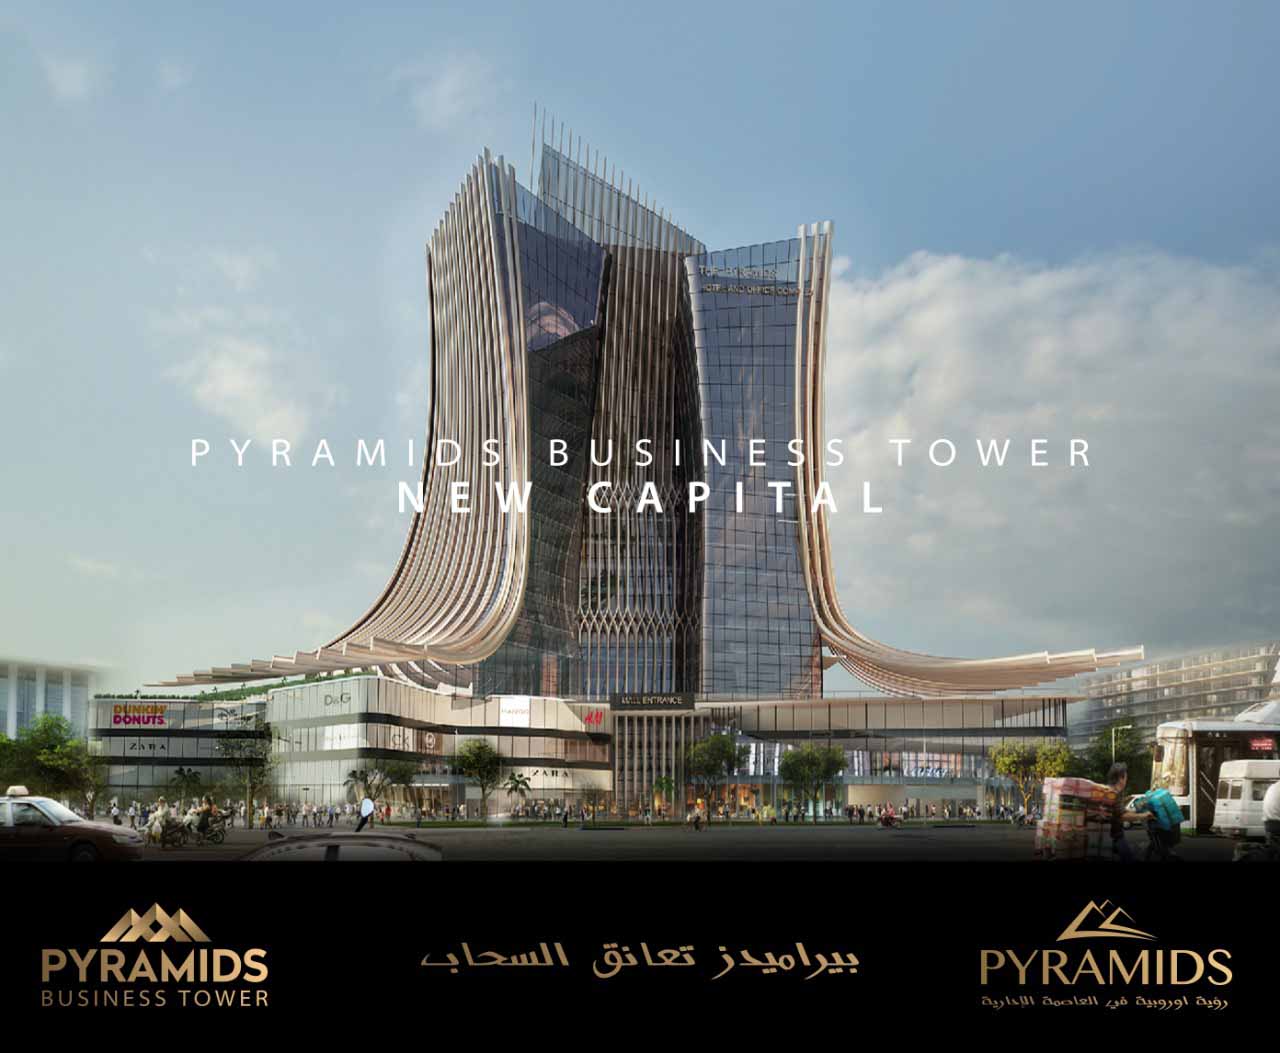 What are the services & Amenities of the Pyramids Business Tower project, New Capital?